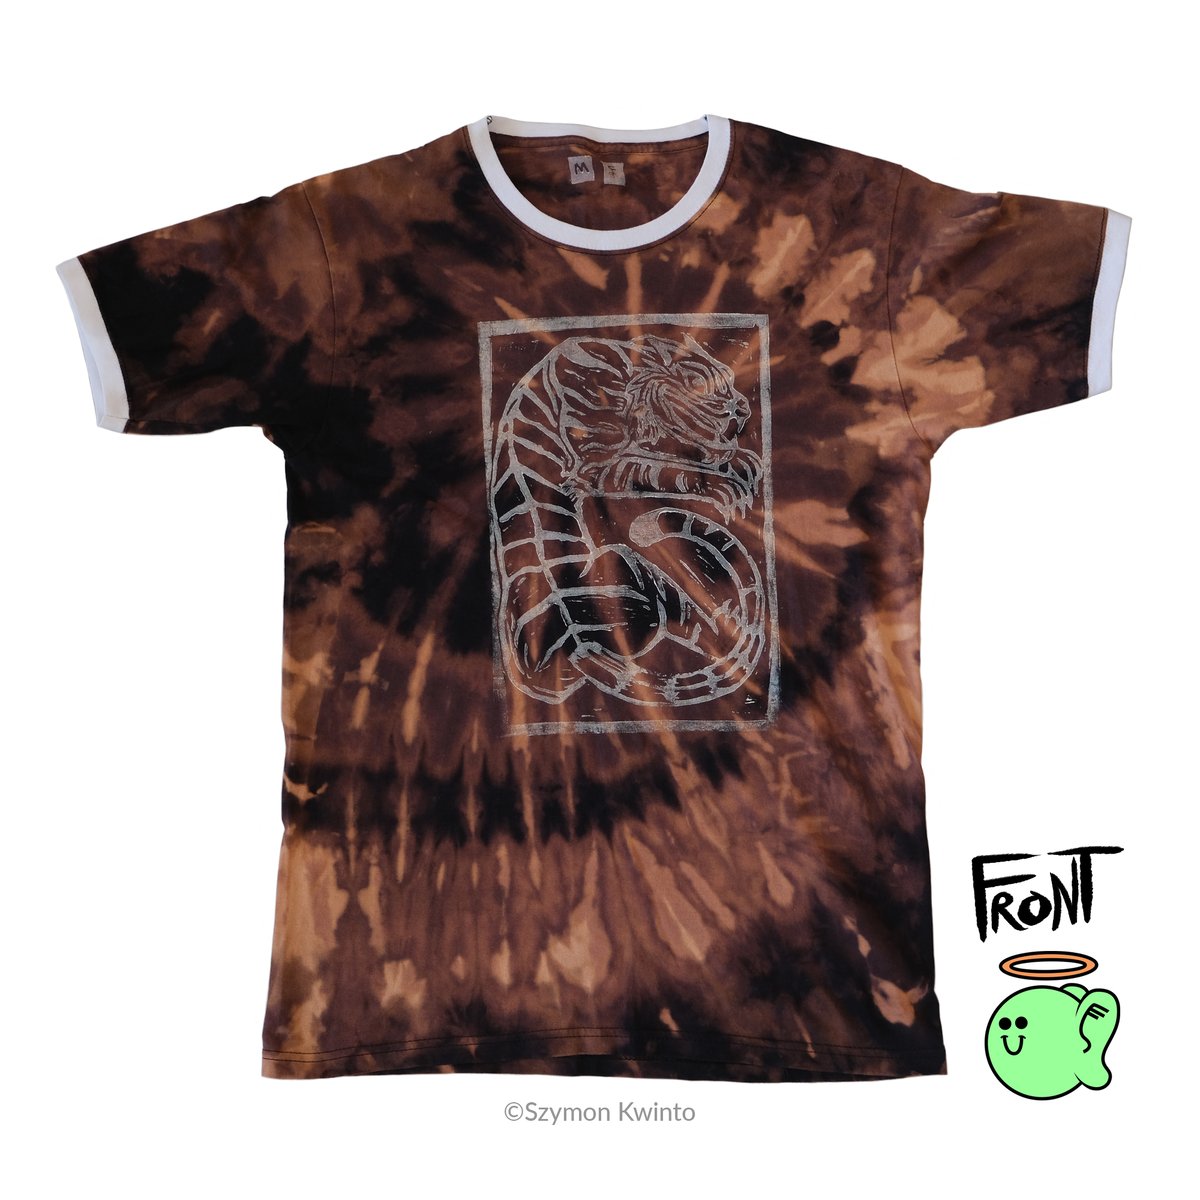 Image of Tiger in a Box reverse tie dye t-shirt (M)